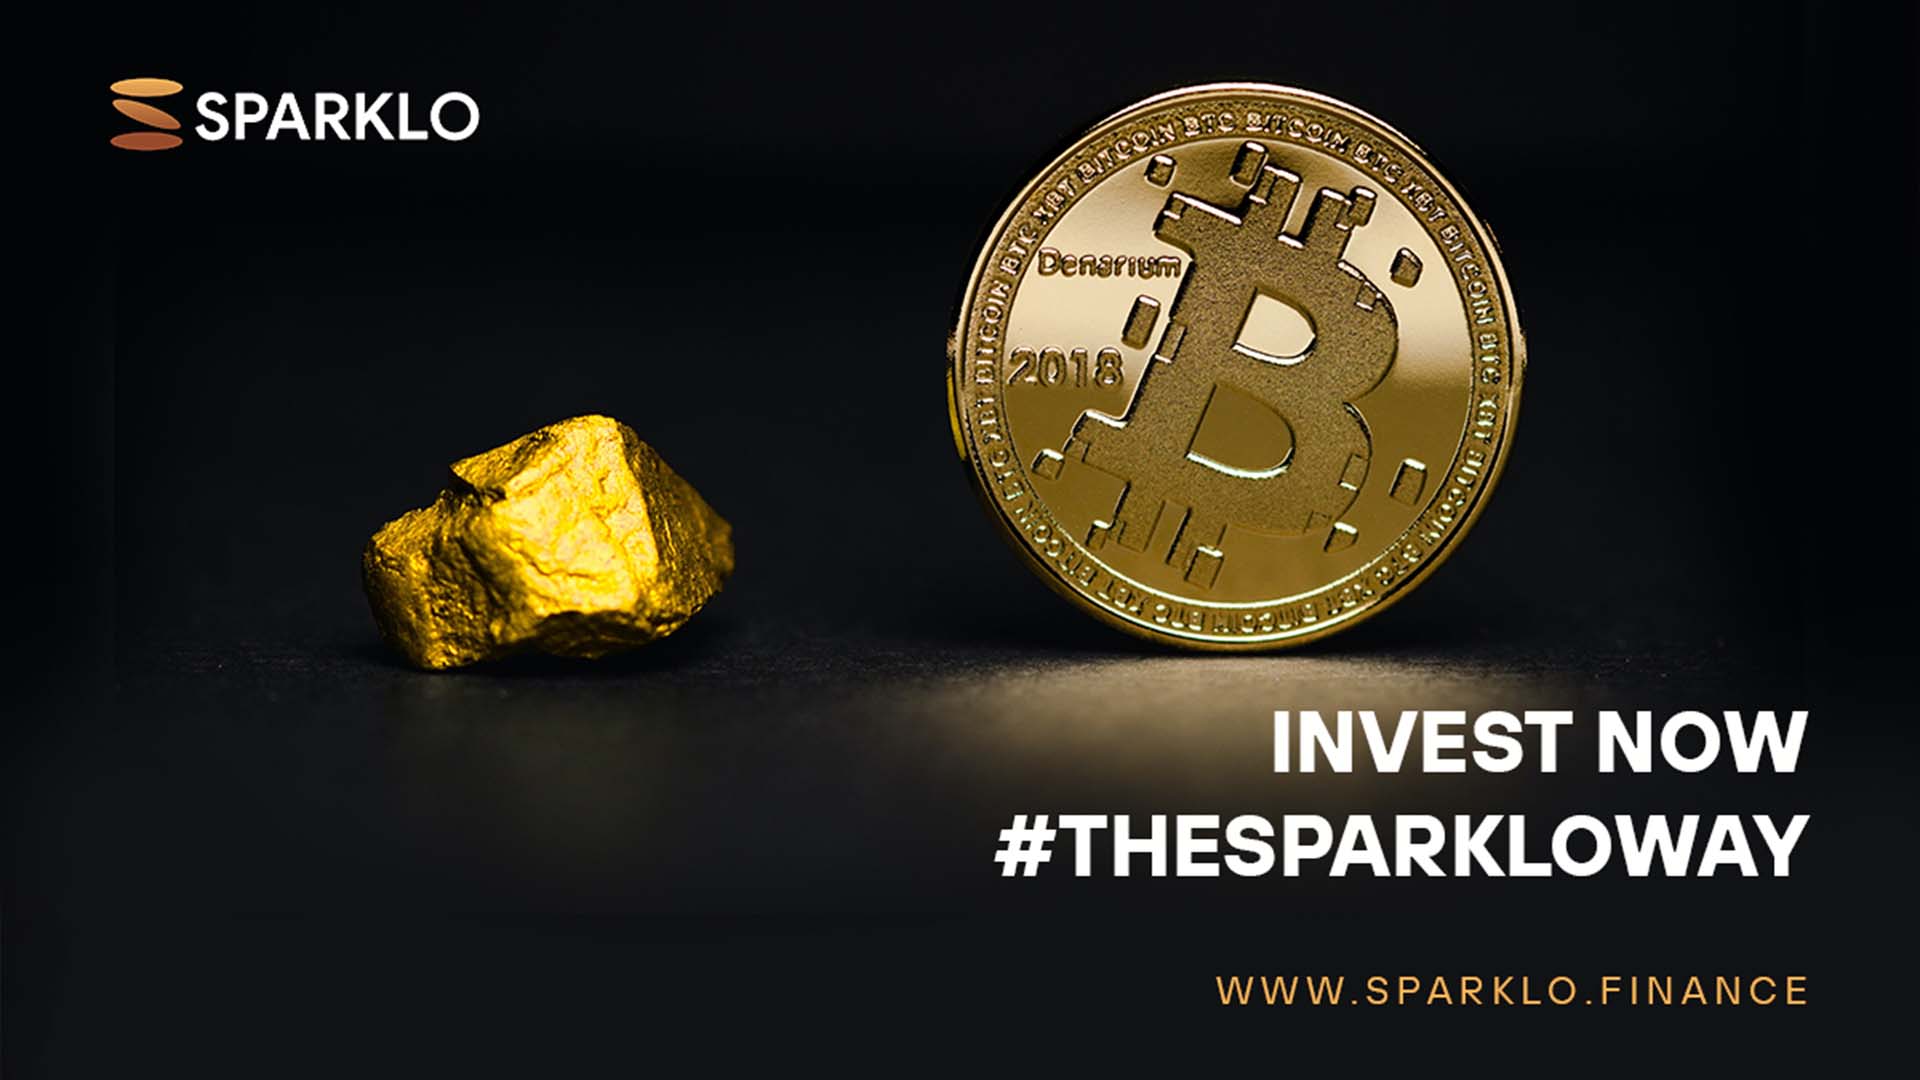 XRP and Sparklo: Assets Primed for the Next Bull Market Wave